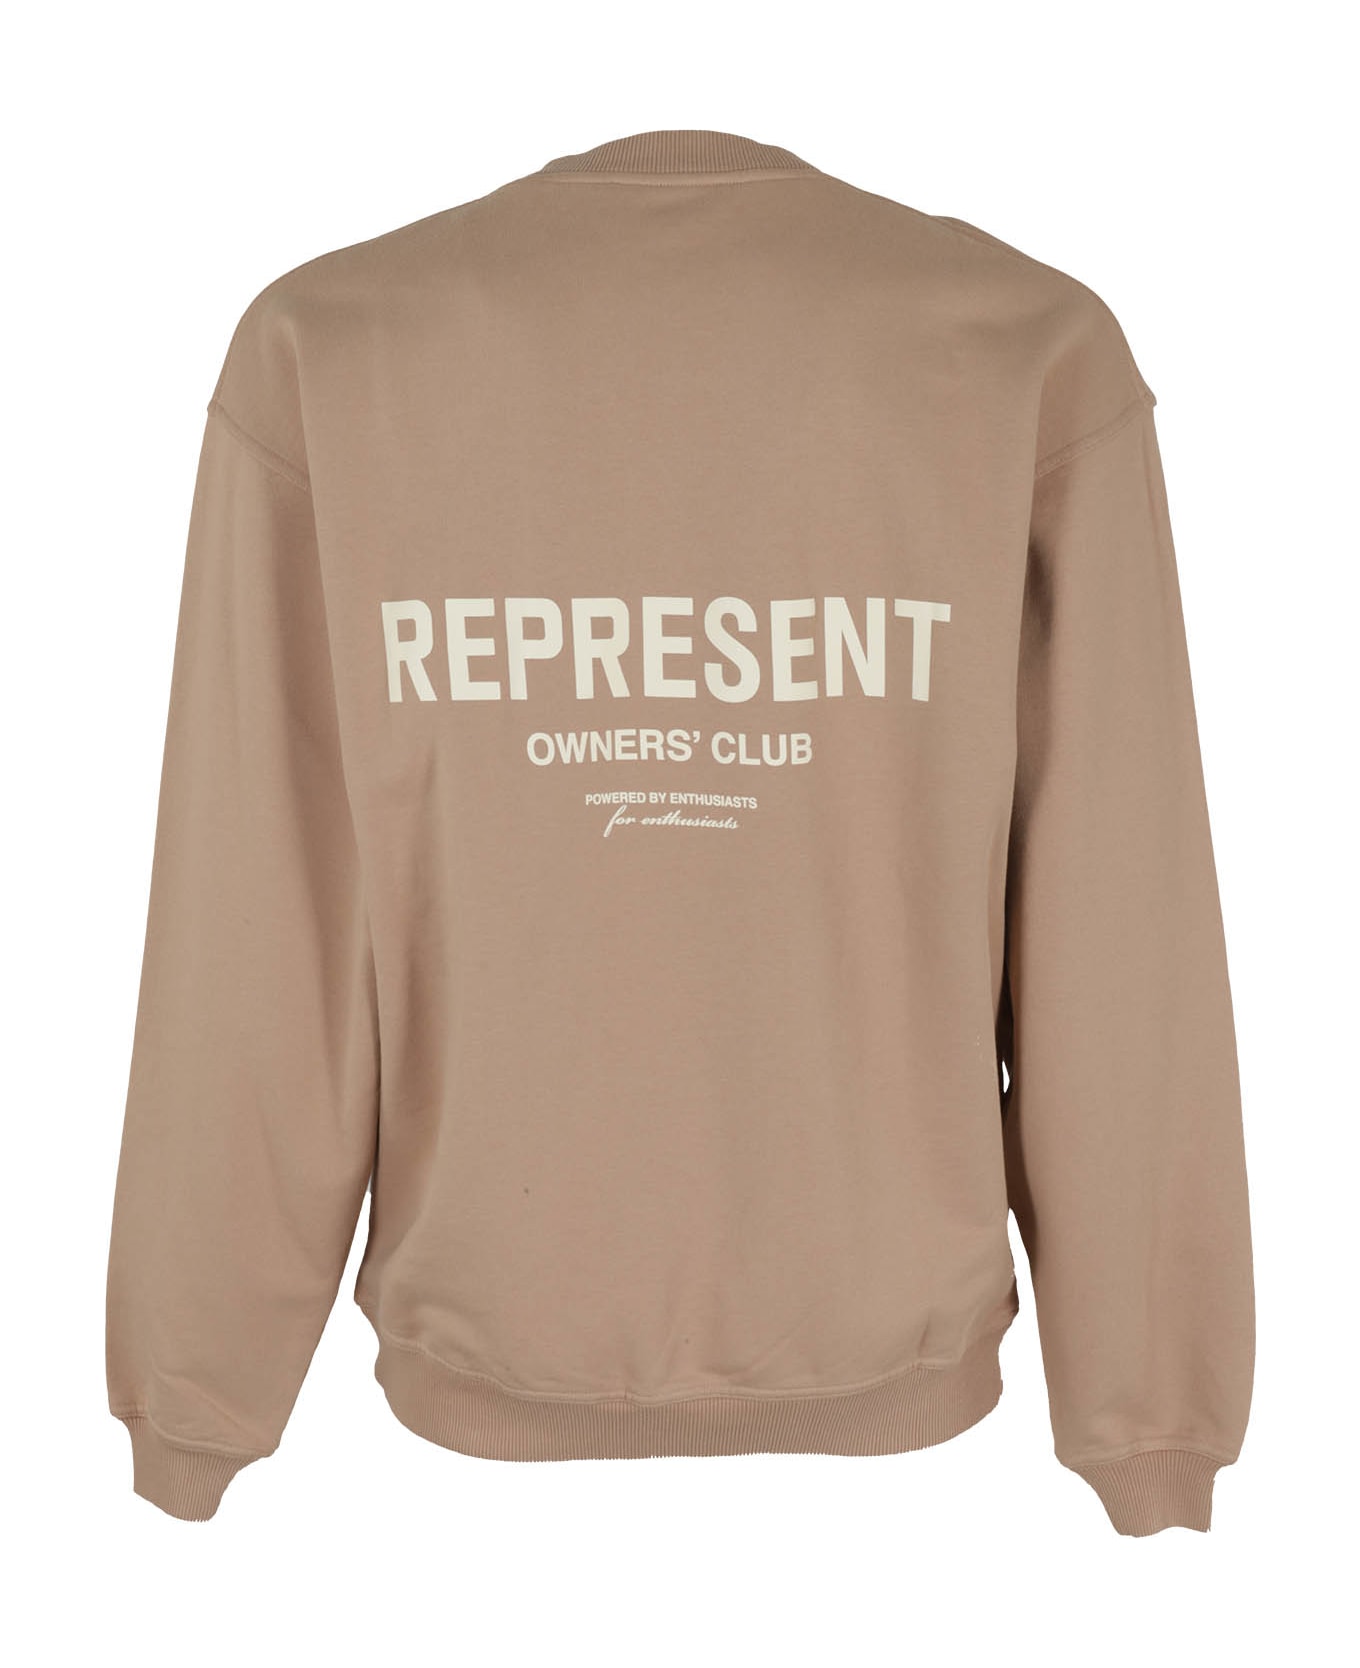 REPRESENT Owners Club Sweater - Stucco フリース